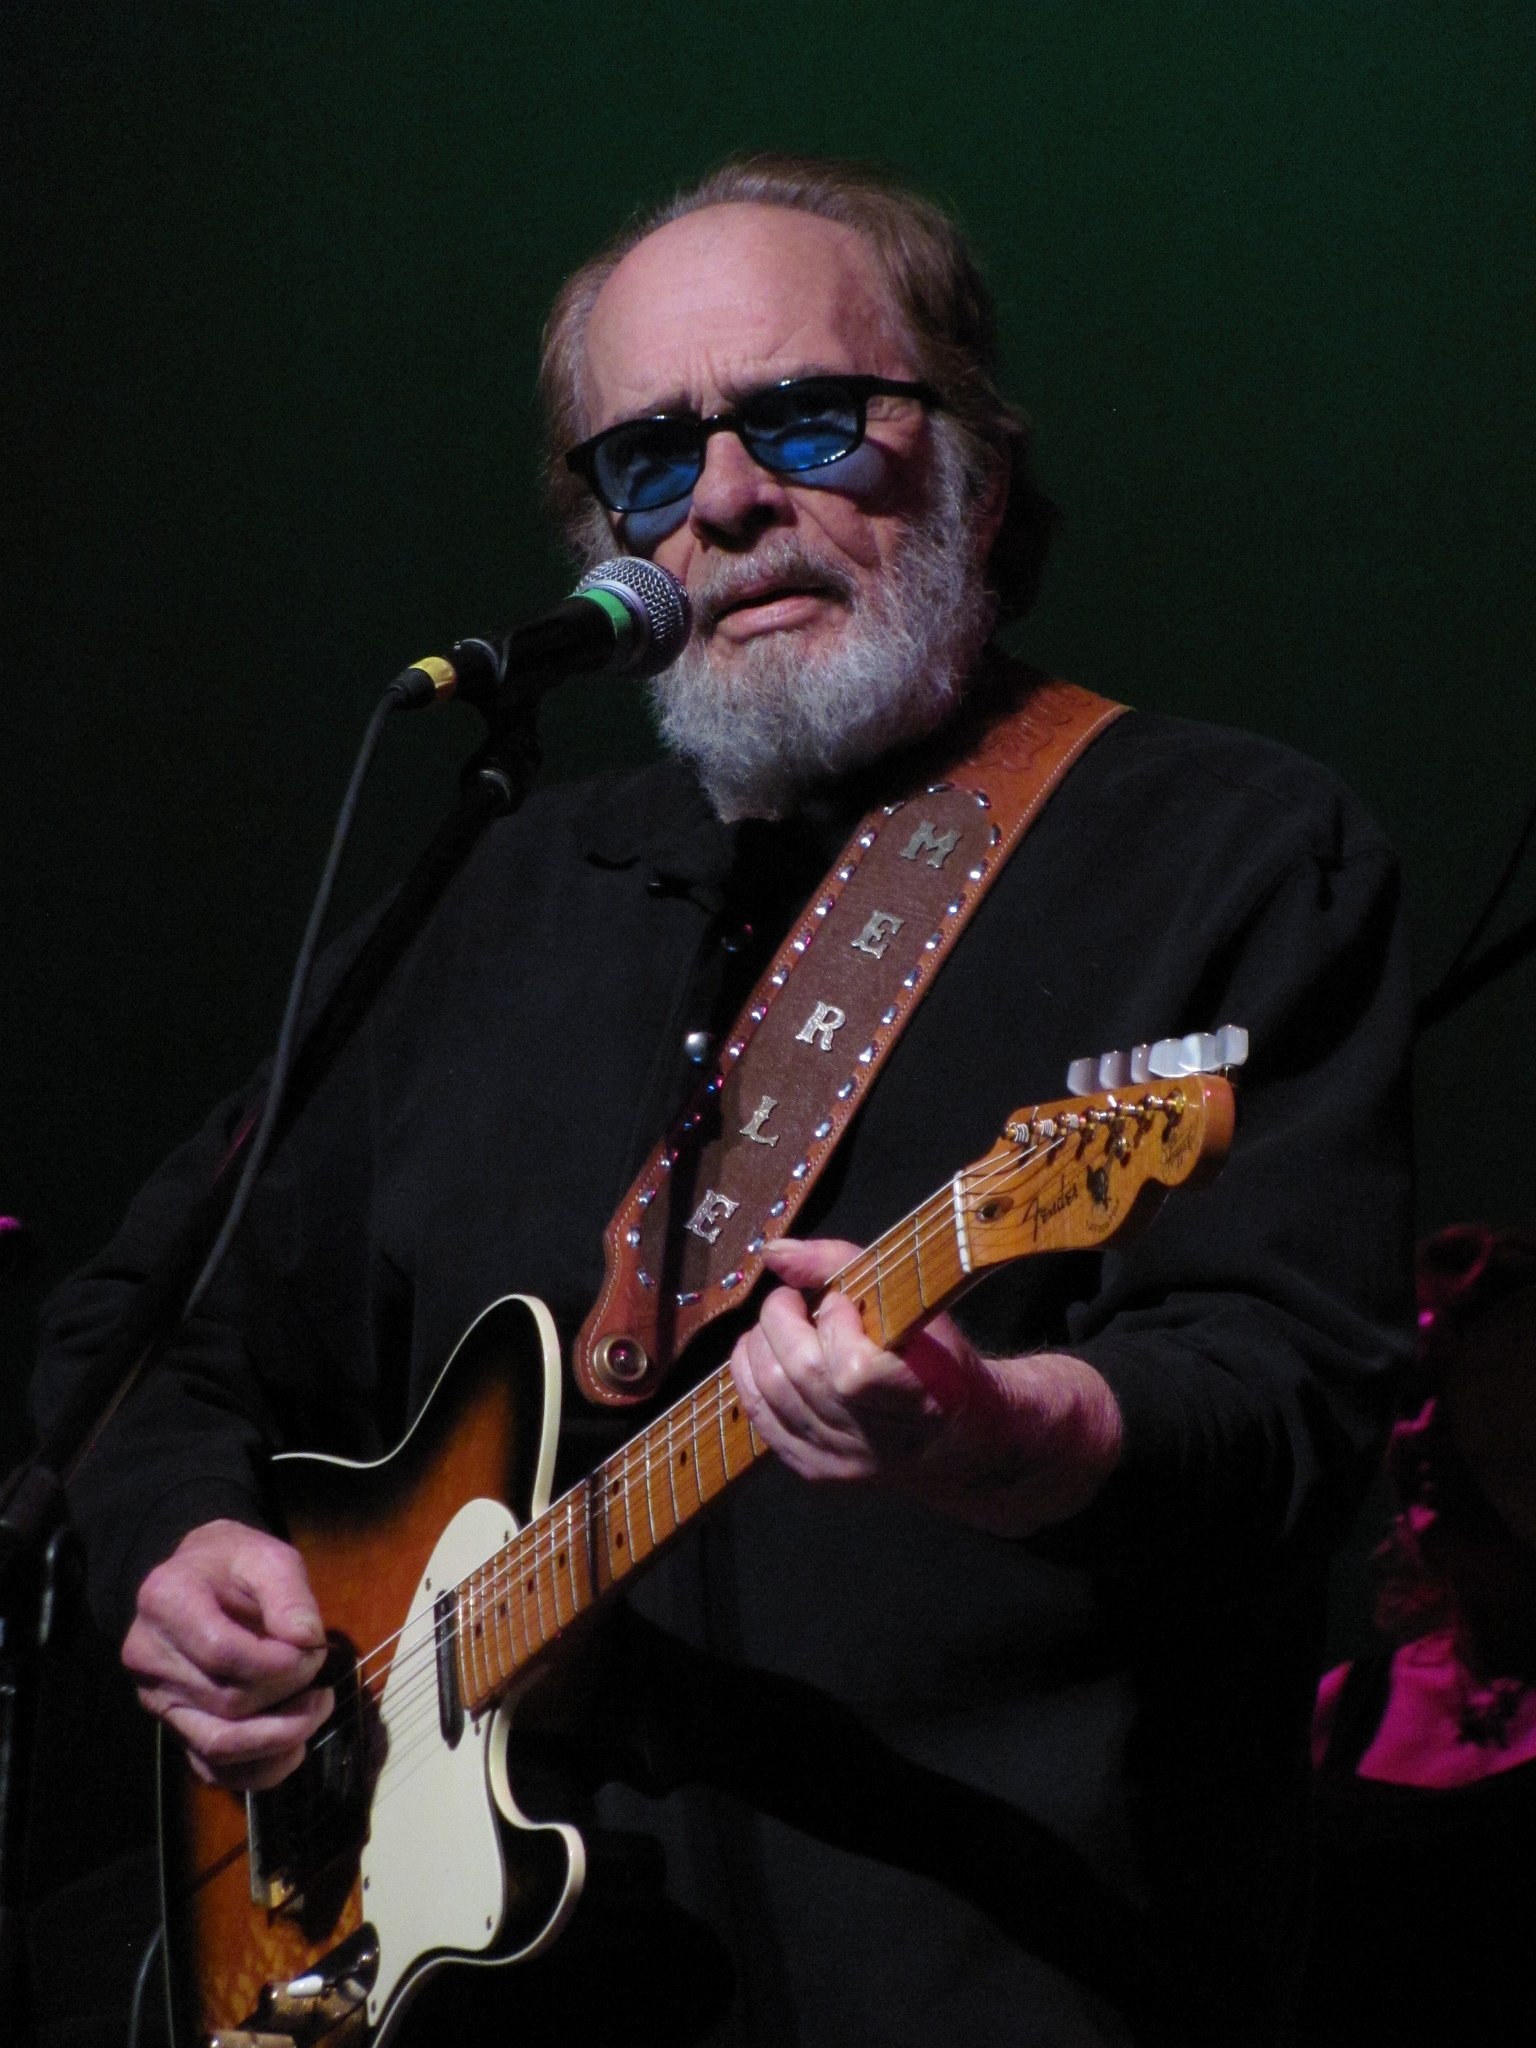 Merle Haggard at the Classic Center in Athens, Georgia, during Valentine's Day 2013 | Photo: Wikimedia Commons